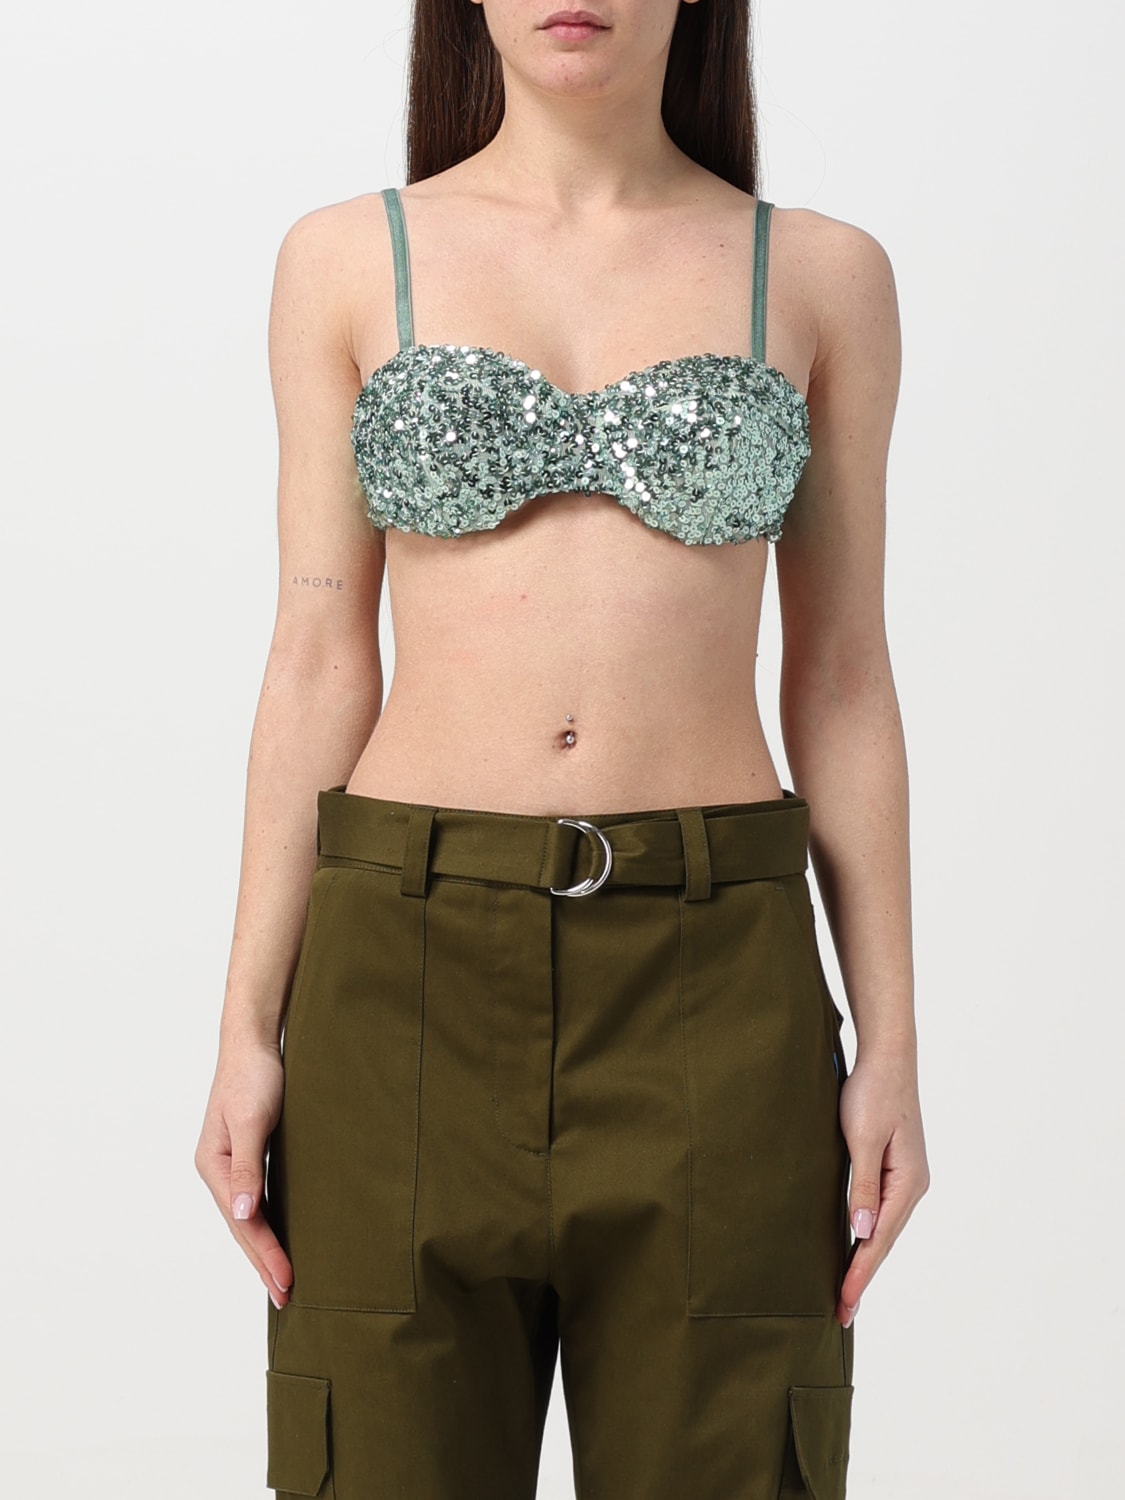 Moschino Bras for Women, Online Sale up to 70% off